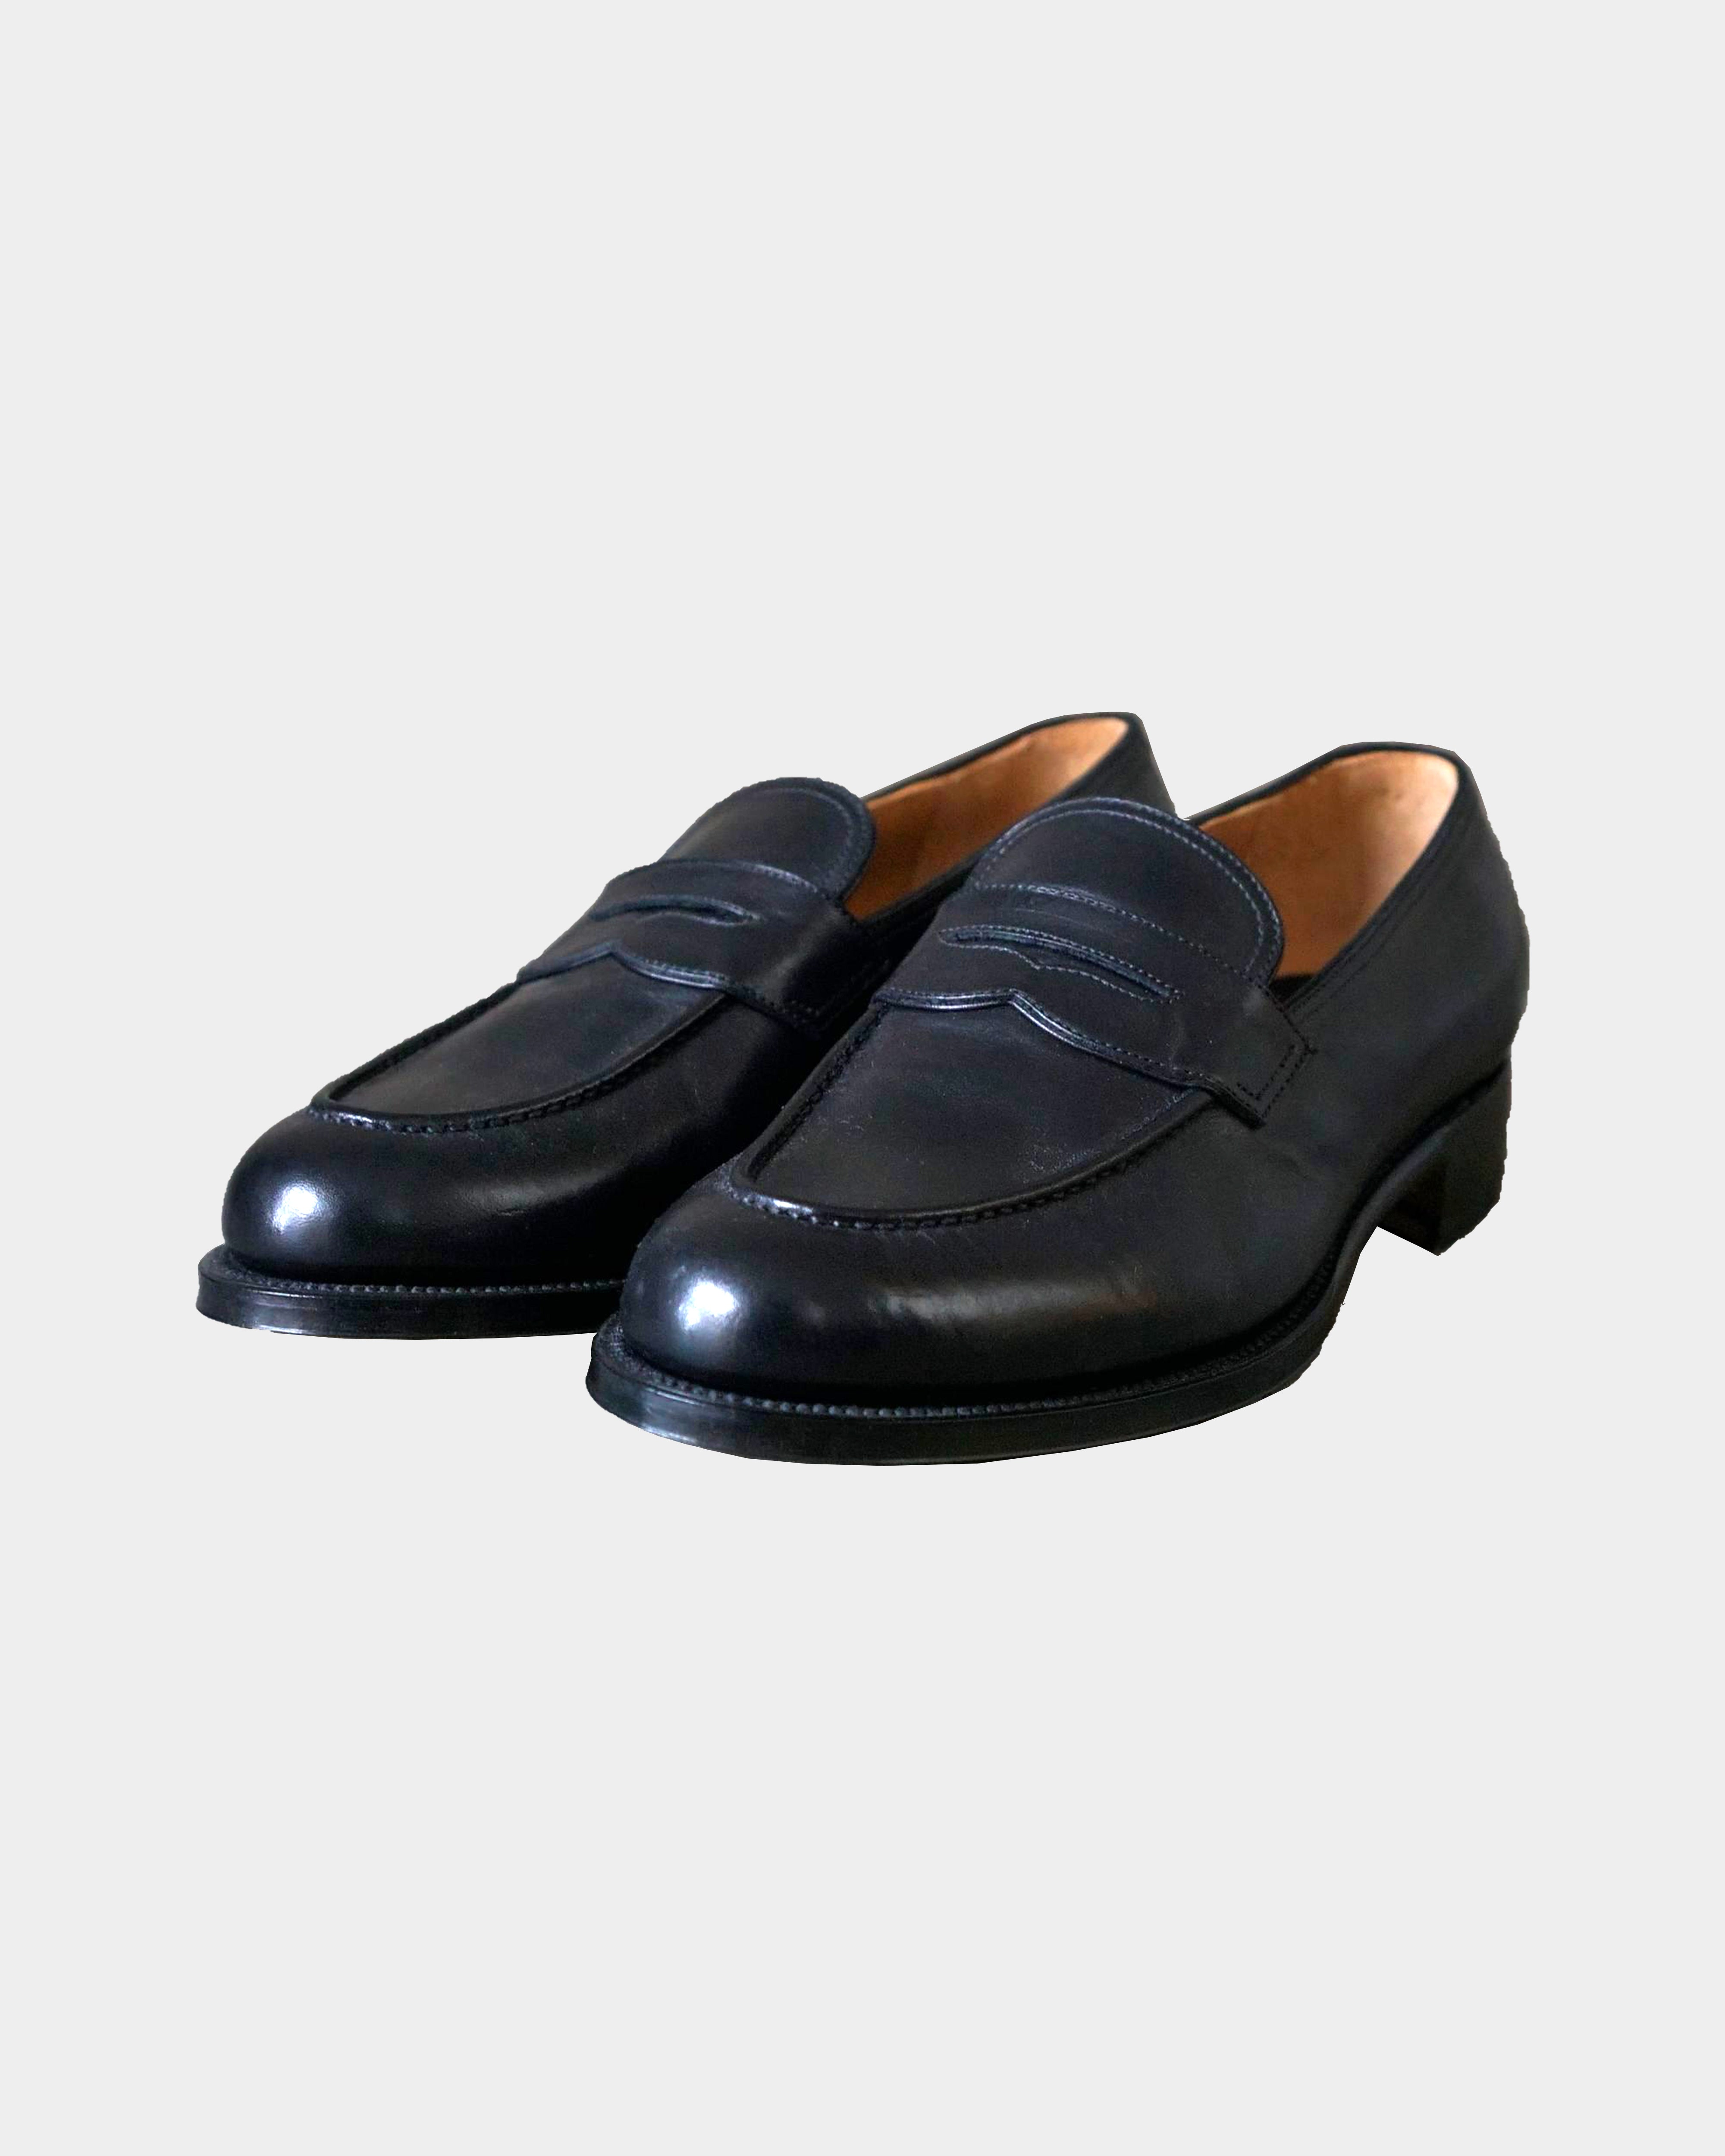 forme fm-111 Loafer goodyear welted サイズ6 - ドレス/ビジネス